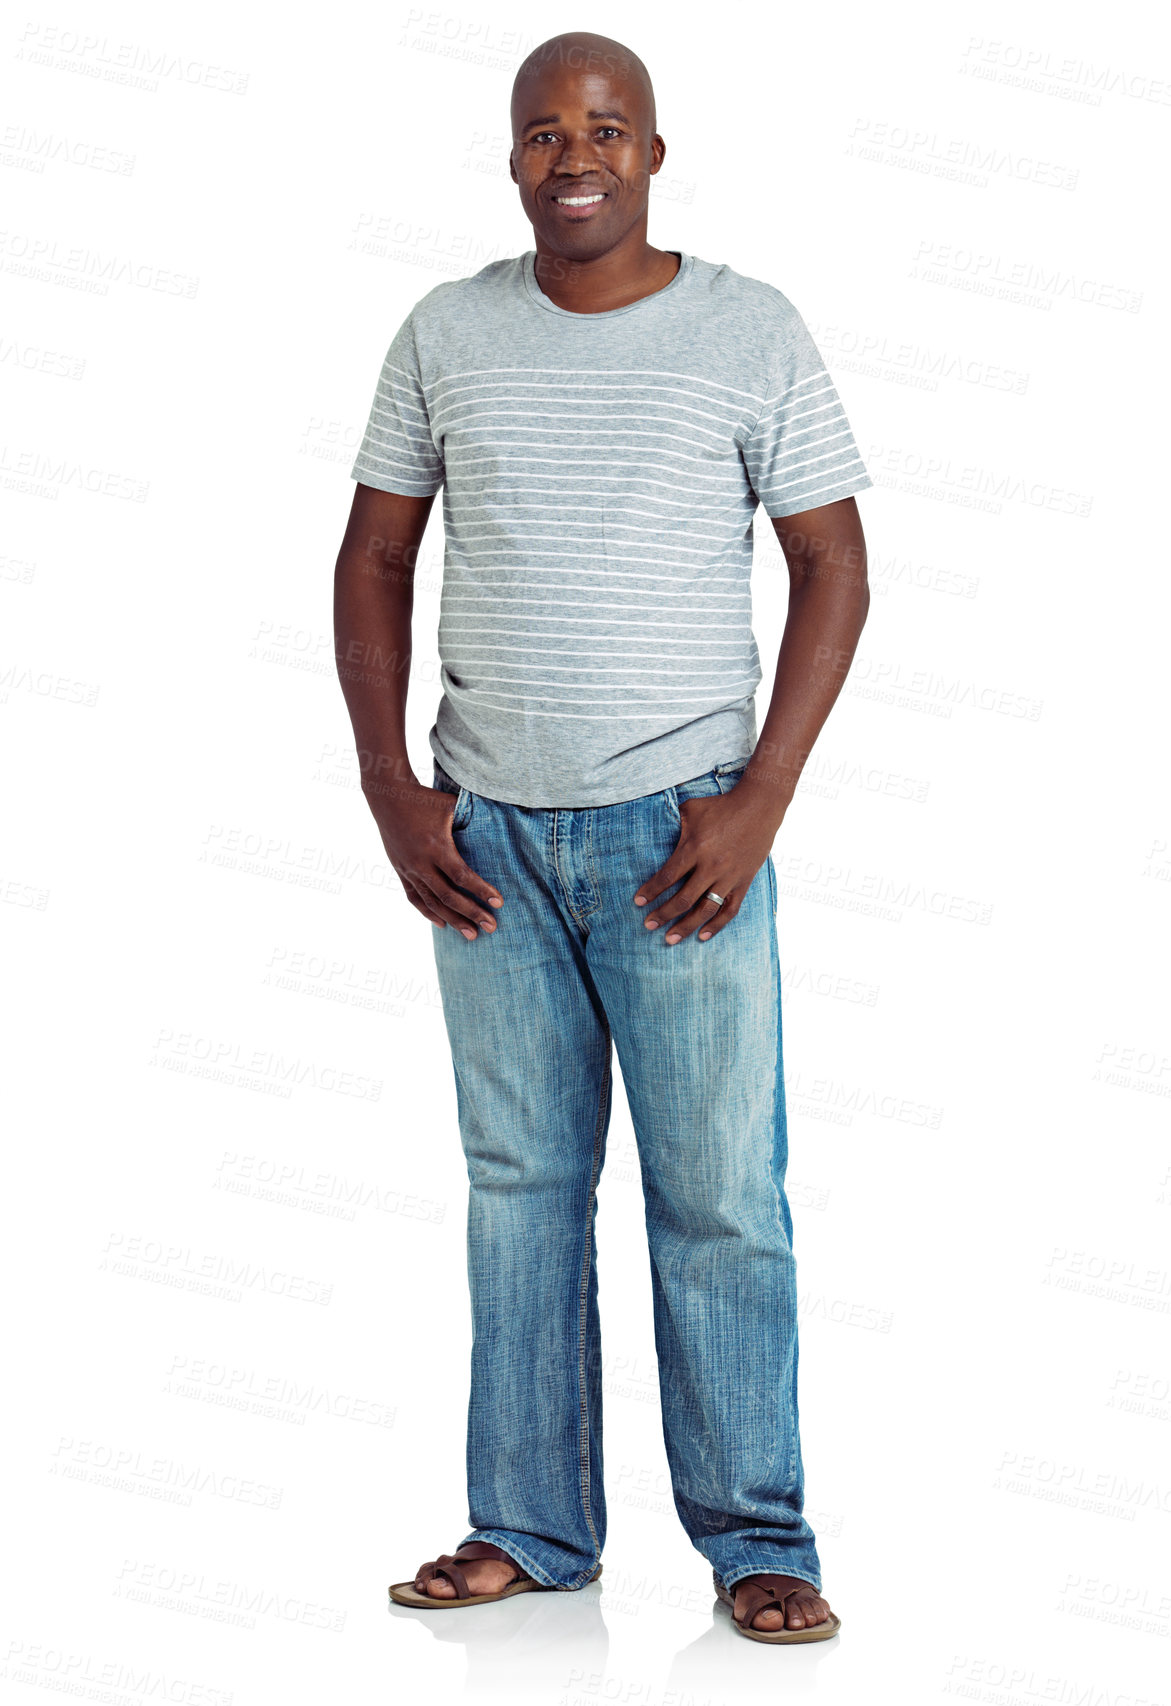 Buy stock photo Studio shot of an african man standing against a white background